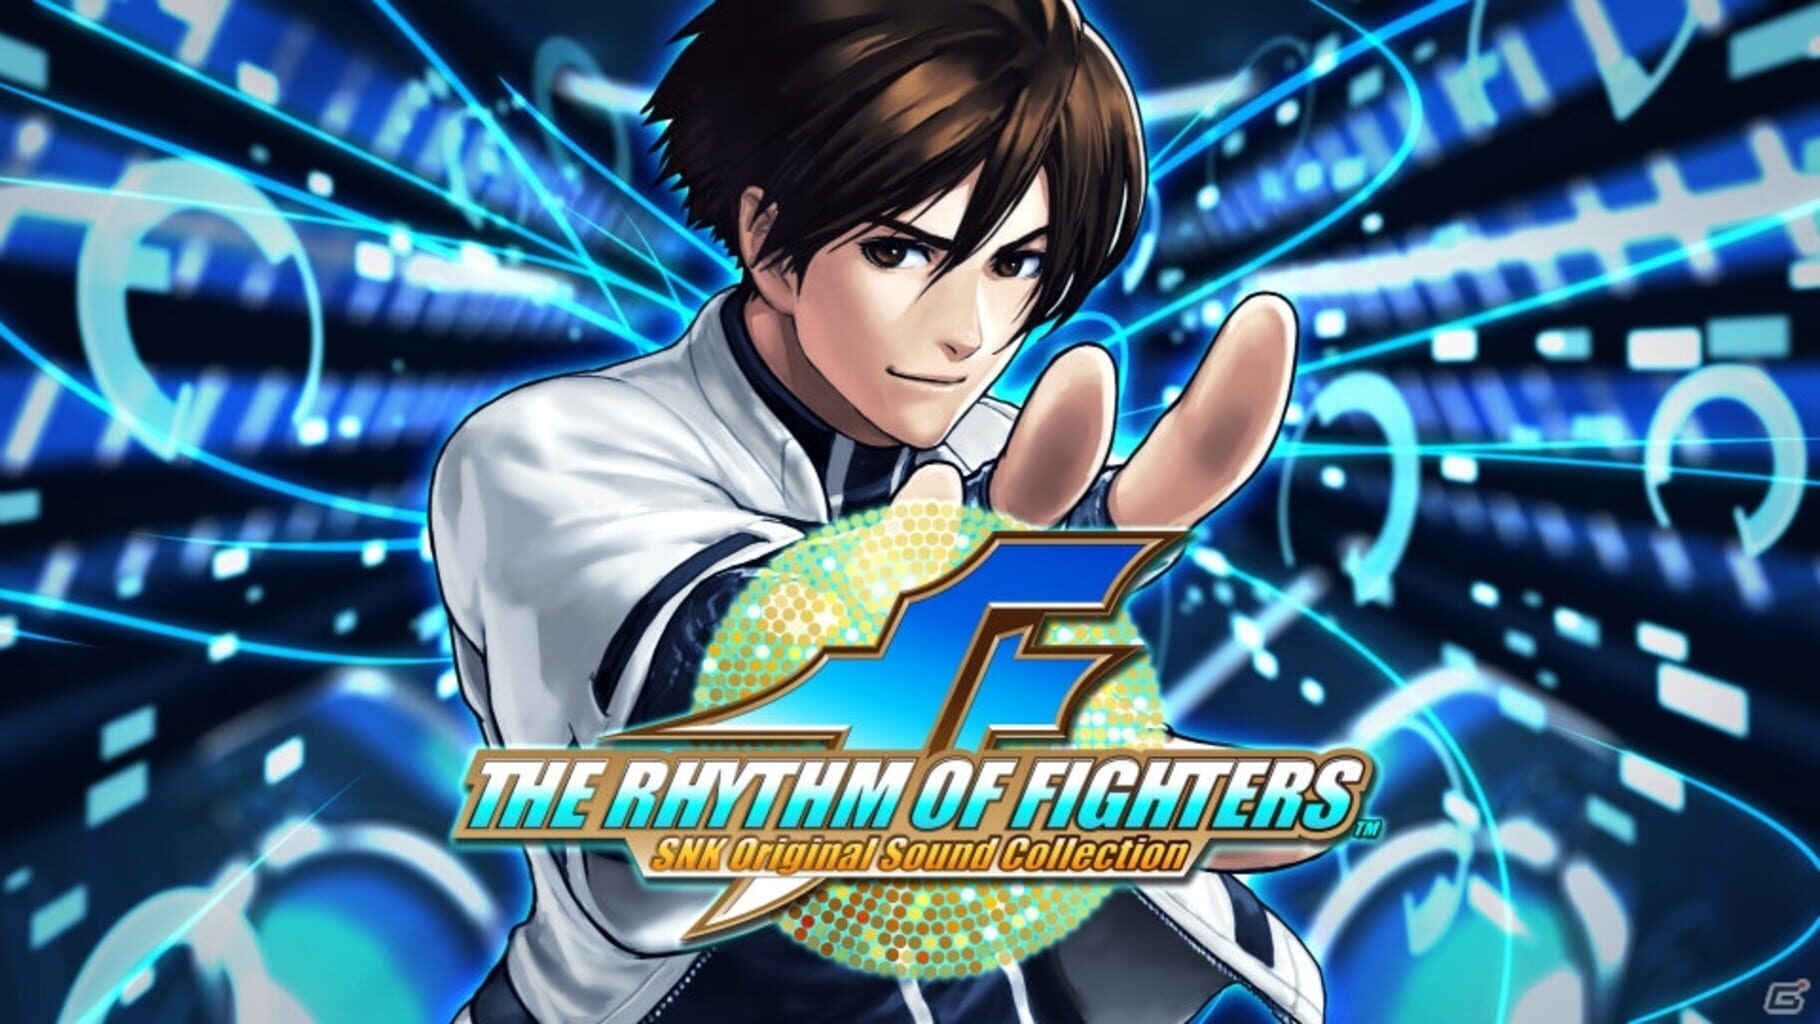 The Rhythm of Fighters: SNK Original Sound Collection